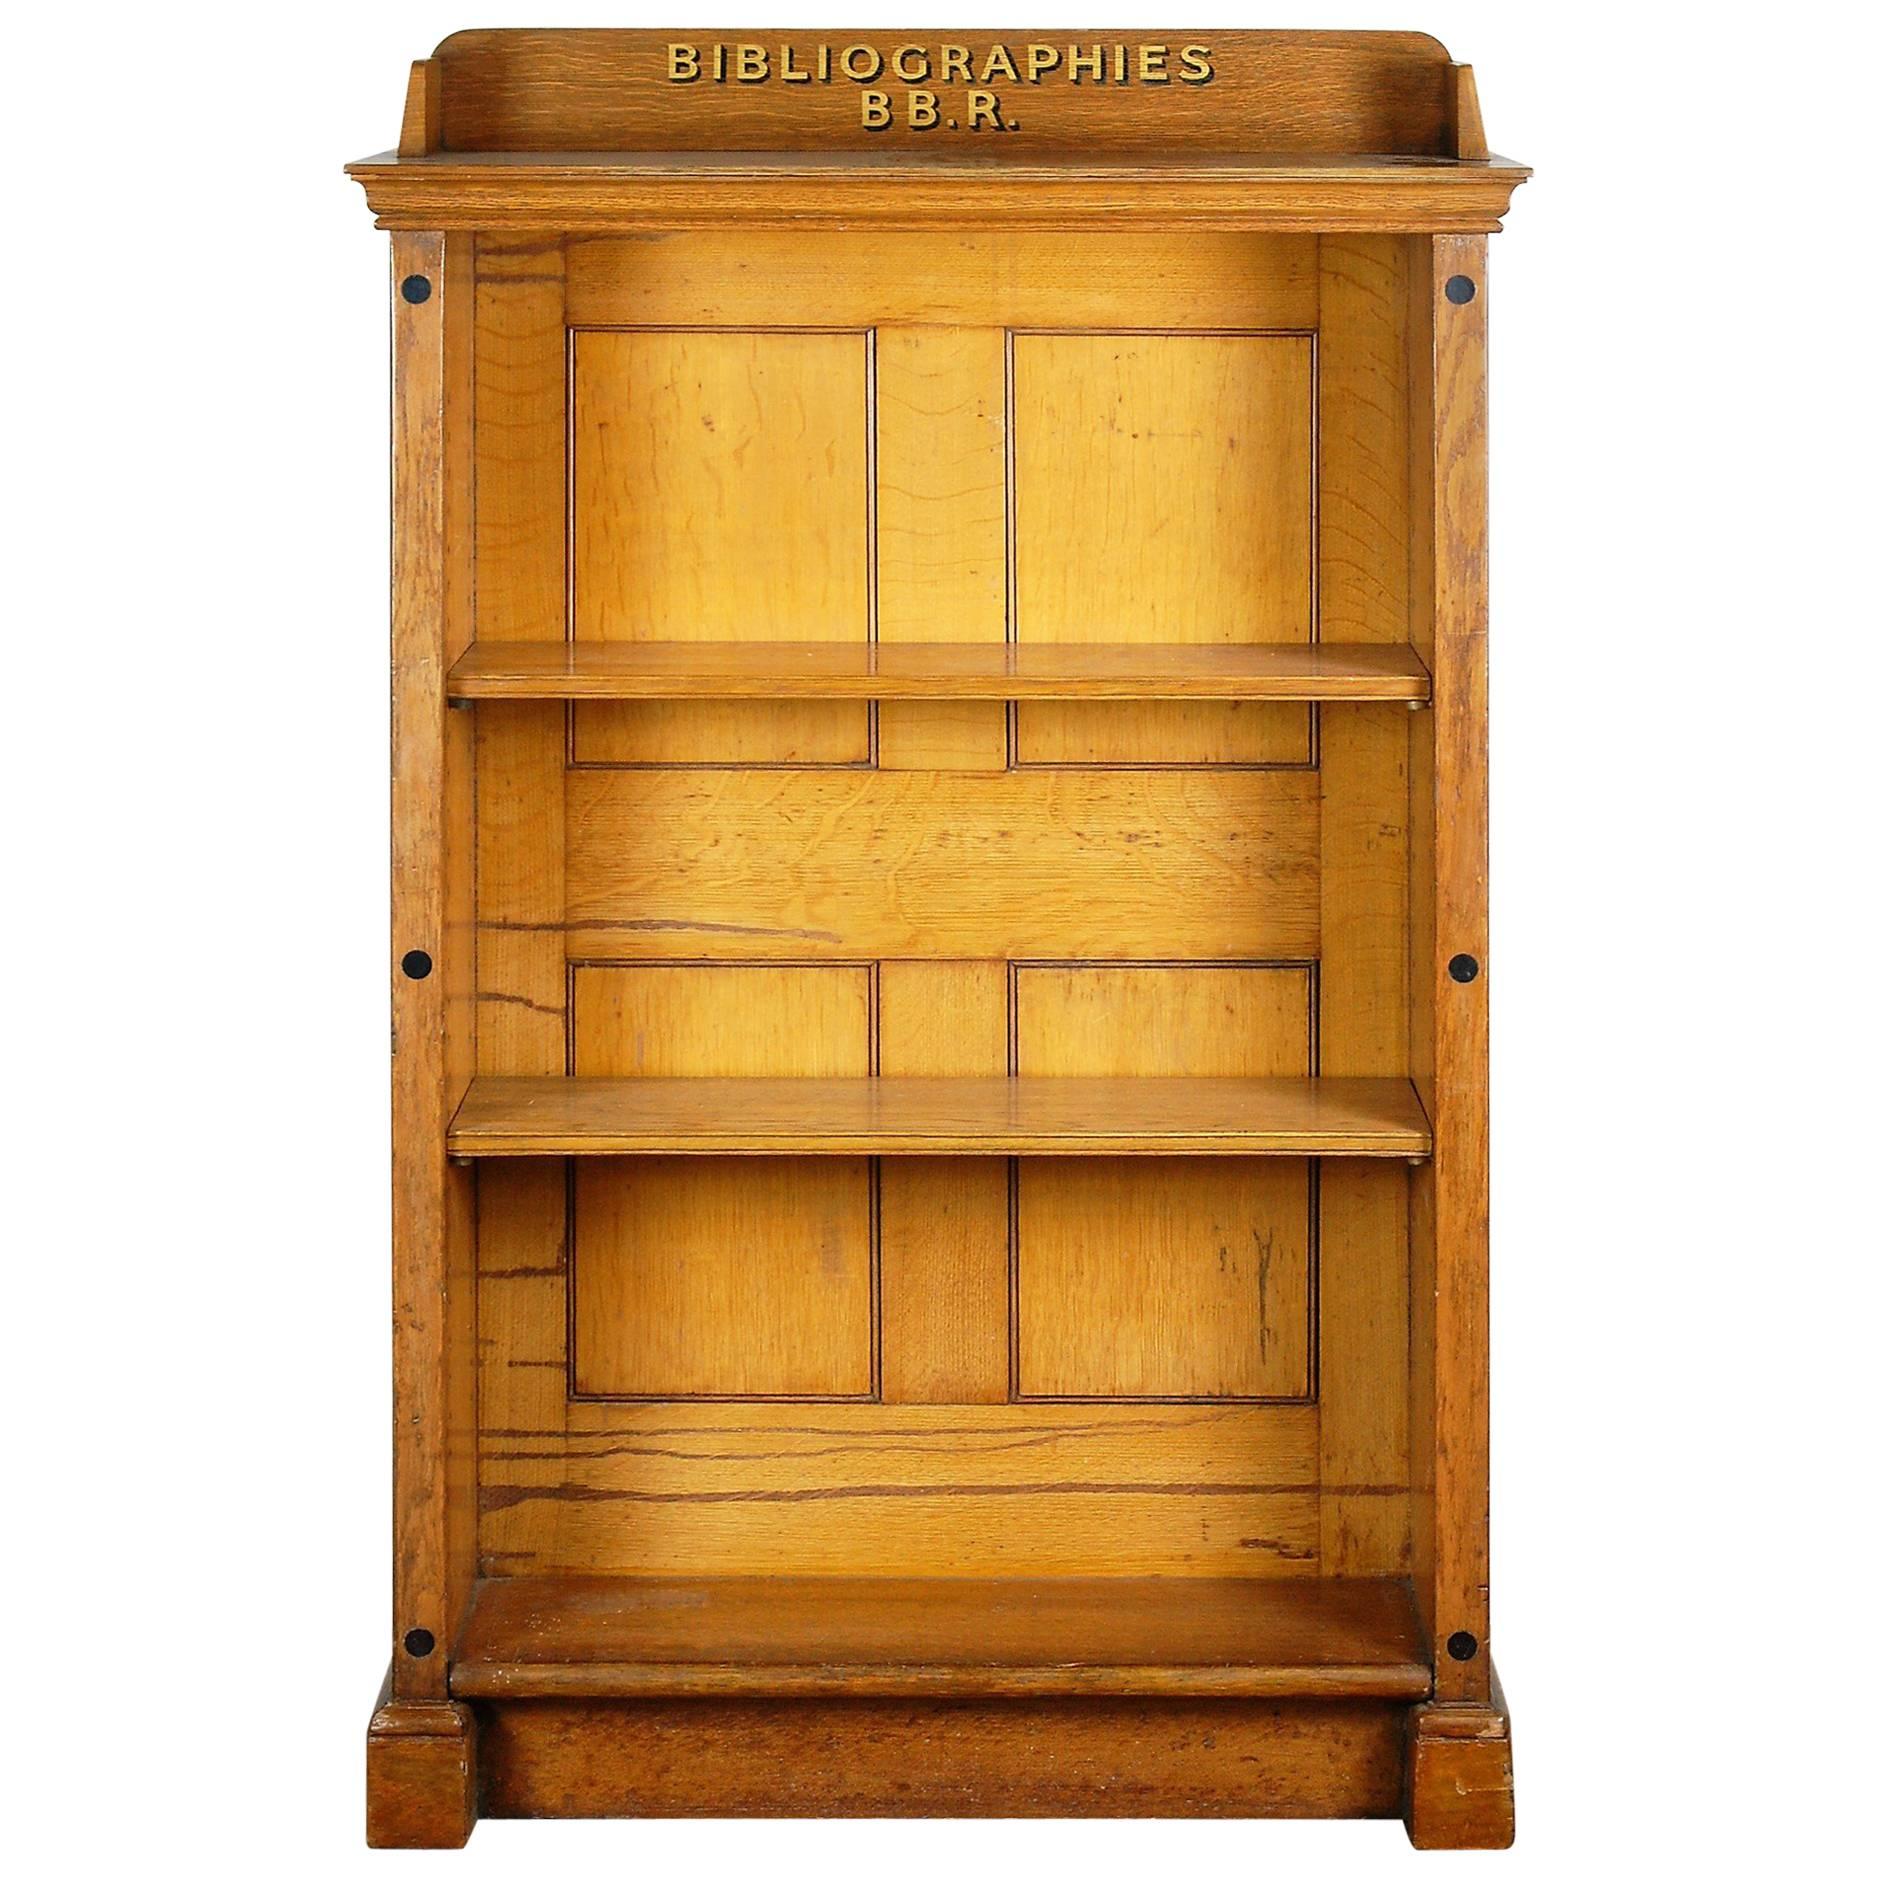 Late 19th Century Double Sided Oak Library Bookcase